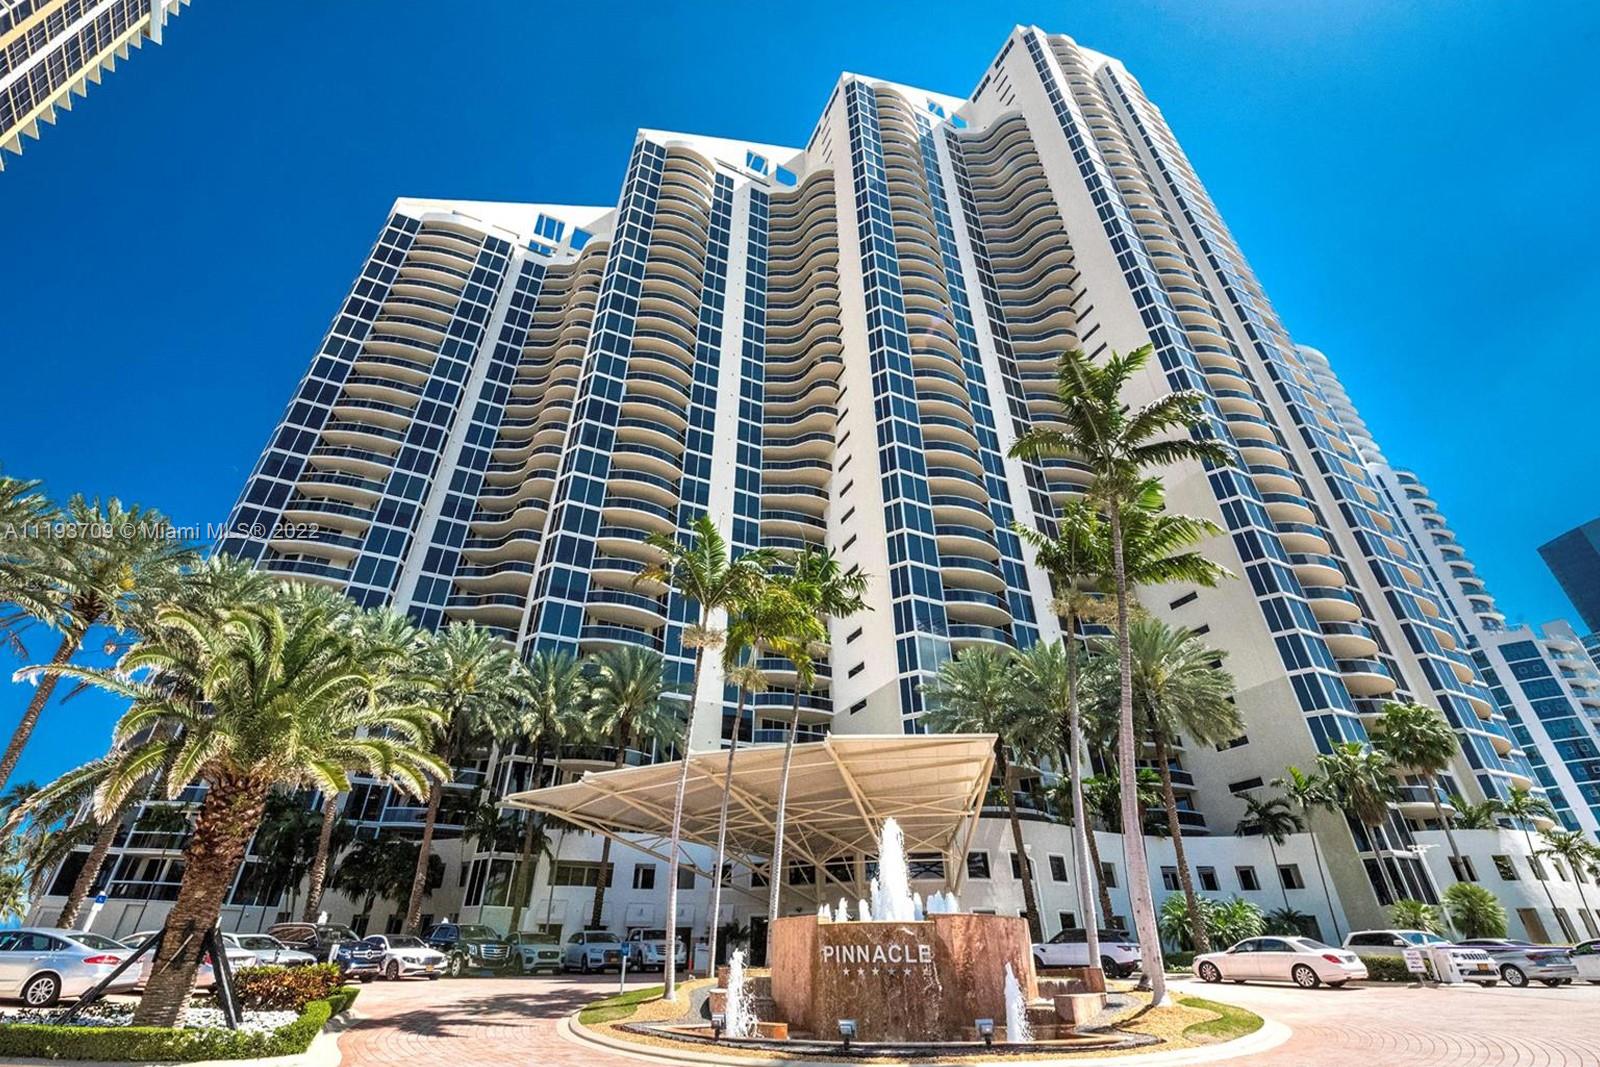 Enjoy Stunning direct ocean views from this spacious flow through residence located in the prestigious Pinnacle building, one of the most sought out buildings in Sunny Isles Beach.  This unit has a great floor plan, living room with incredible ocean views, large Laster Suite with lots of light. Spectacular views from every room. Open kitchen features granite counter top, wood cabinets, and equipped with top of the line appliances. Building features pool, beach service, tennis, fitness center, steam, sauna and 24 hrs. valet. Walking distance from restaurants and shops. MUST SEE!